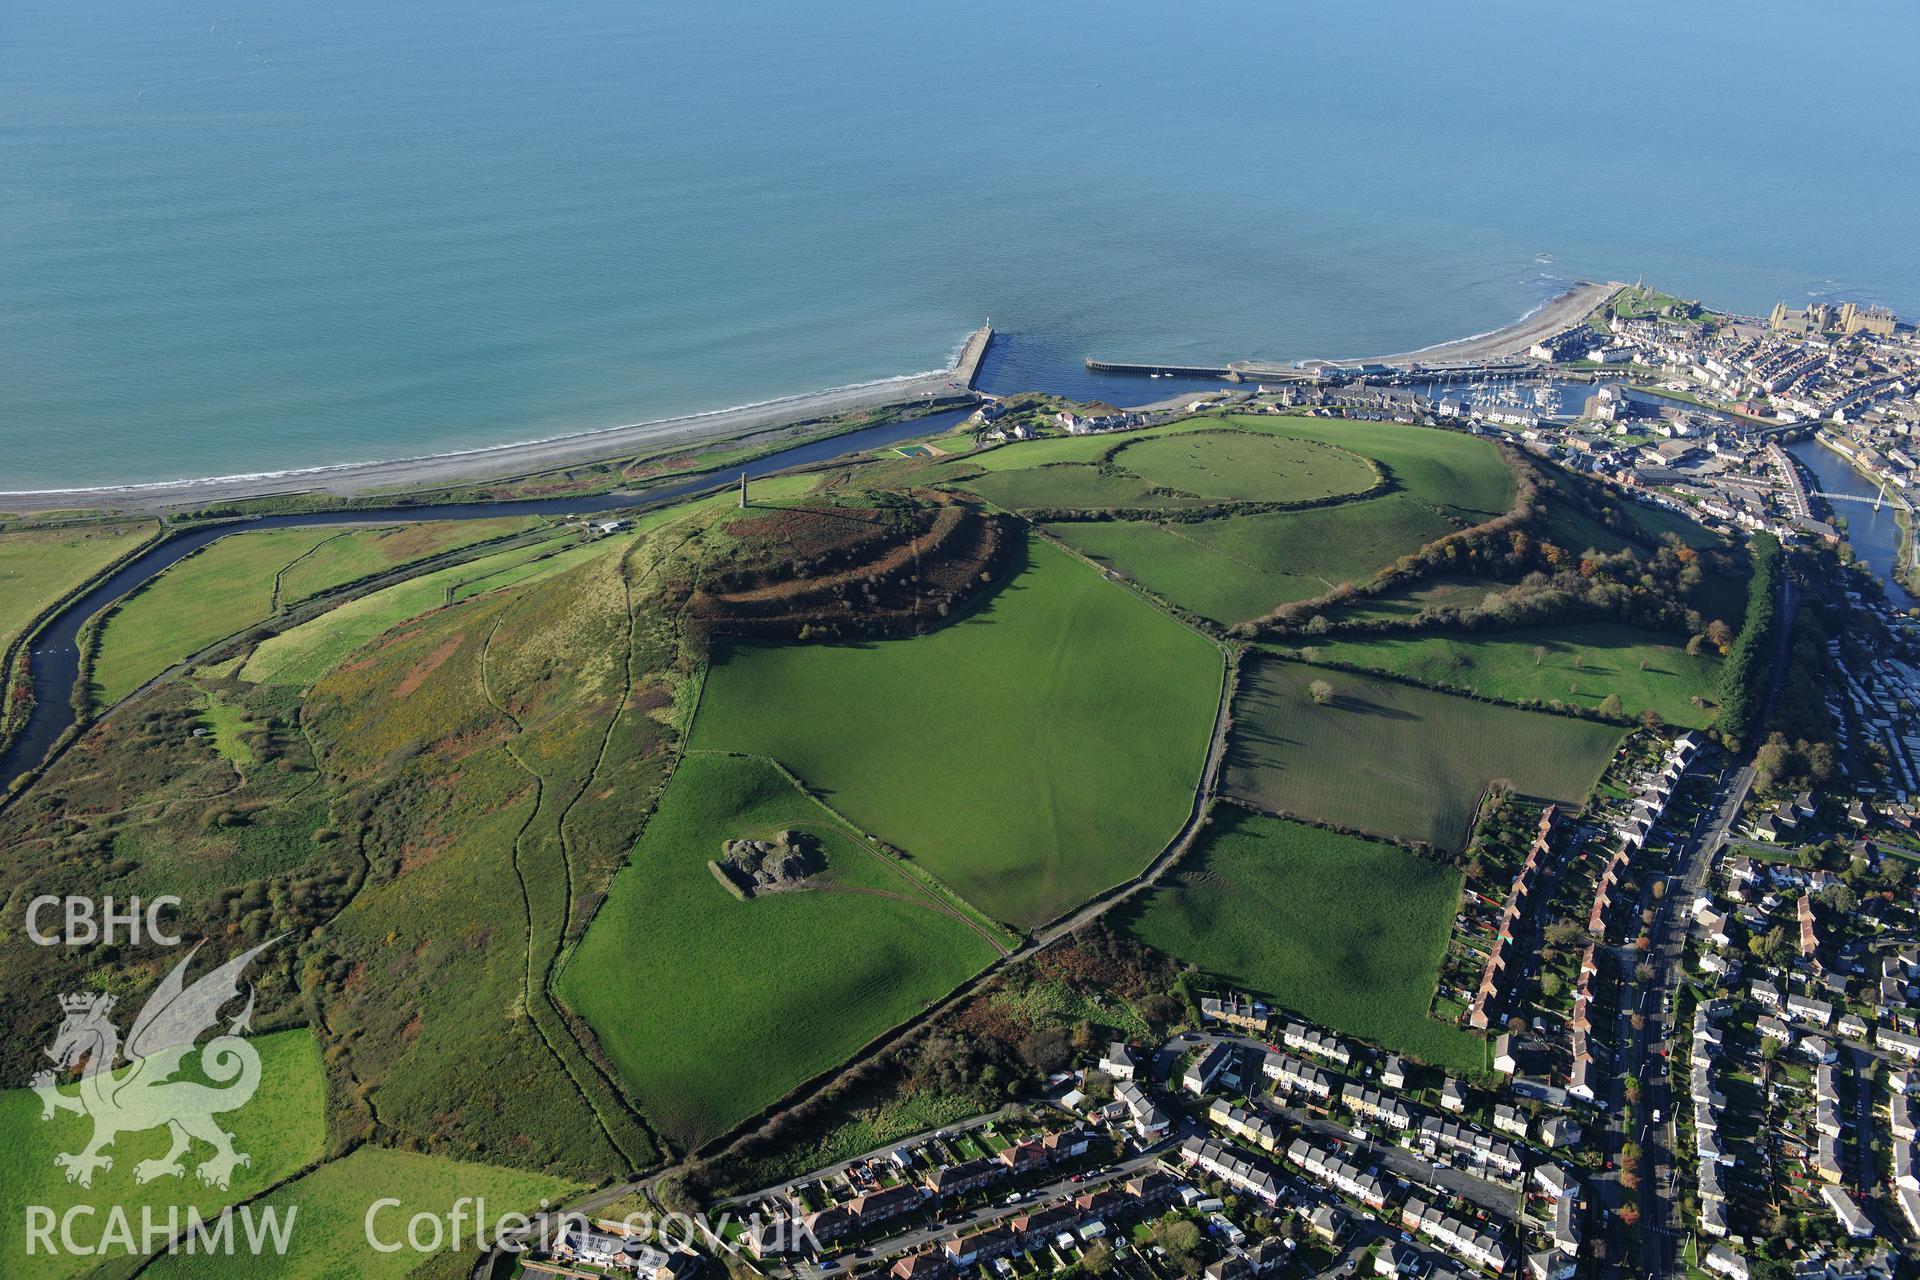 RCAHMW colour oblique photograph of Pen Dinas Hillfort, Aberystwyth. Taken by Toby Driver on 05/11/2012.